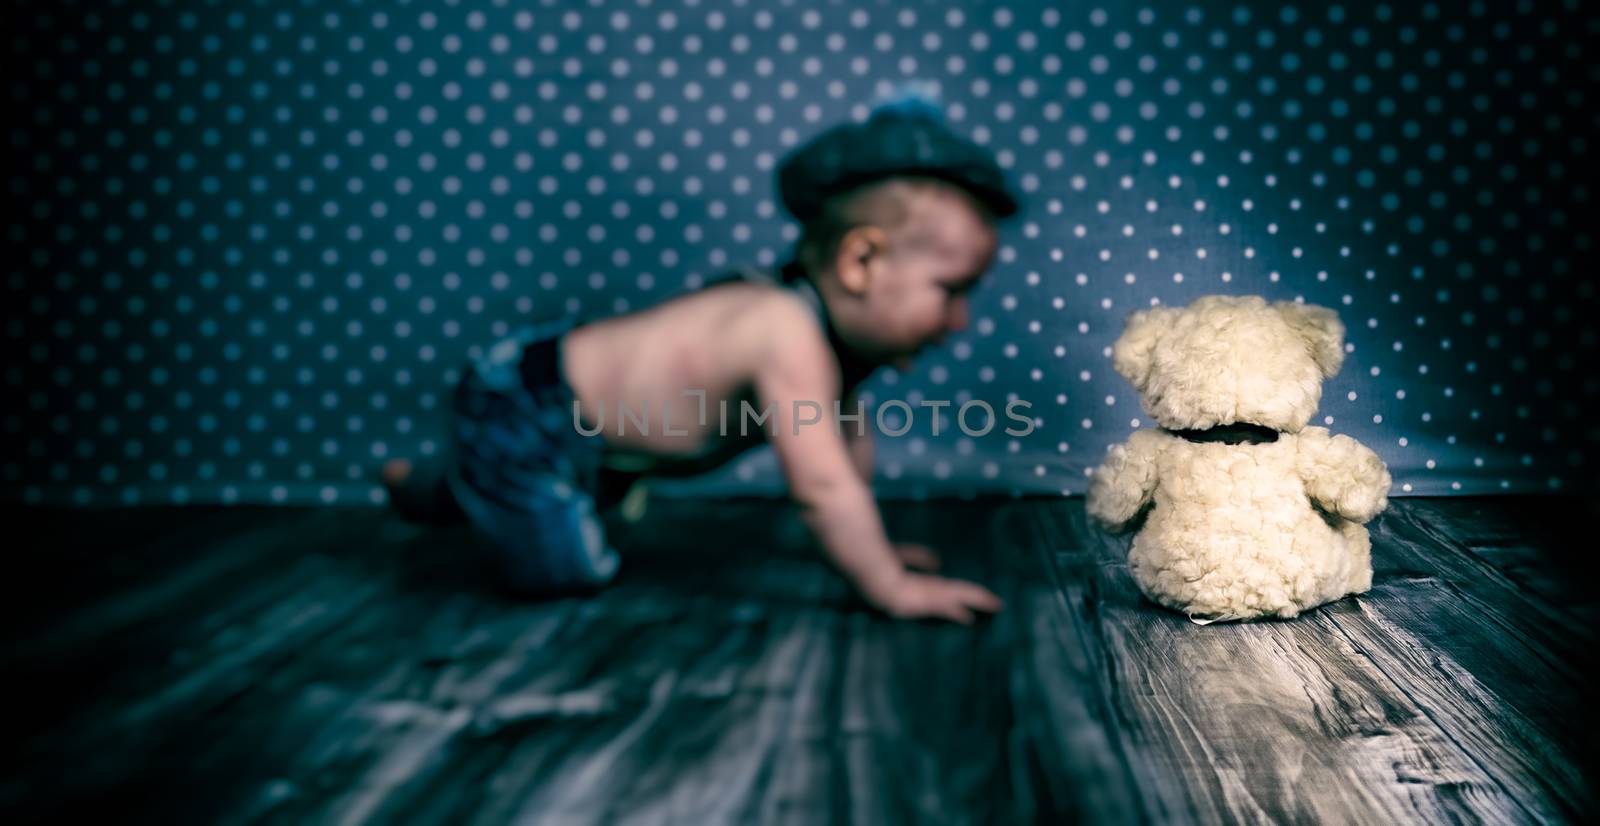 child with vintage hat playing with teddy bear by Isaac74